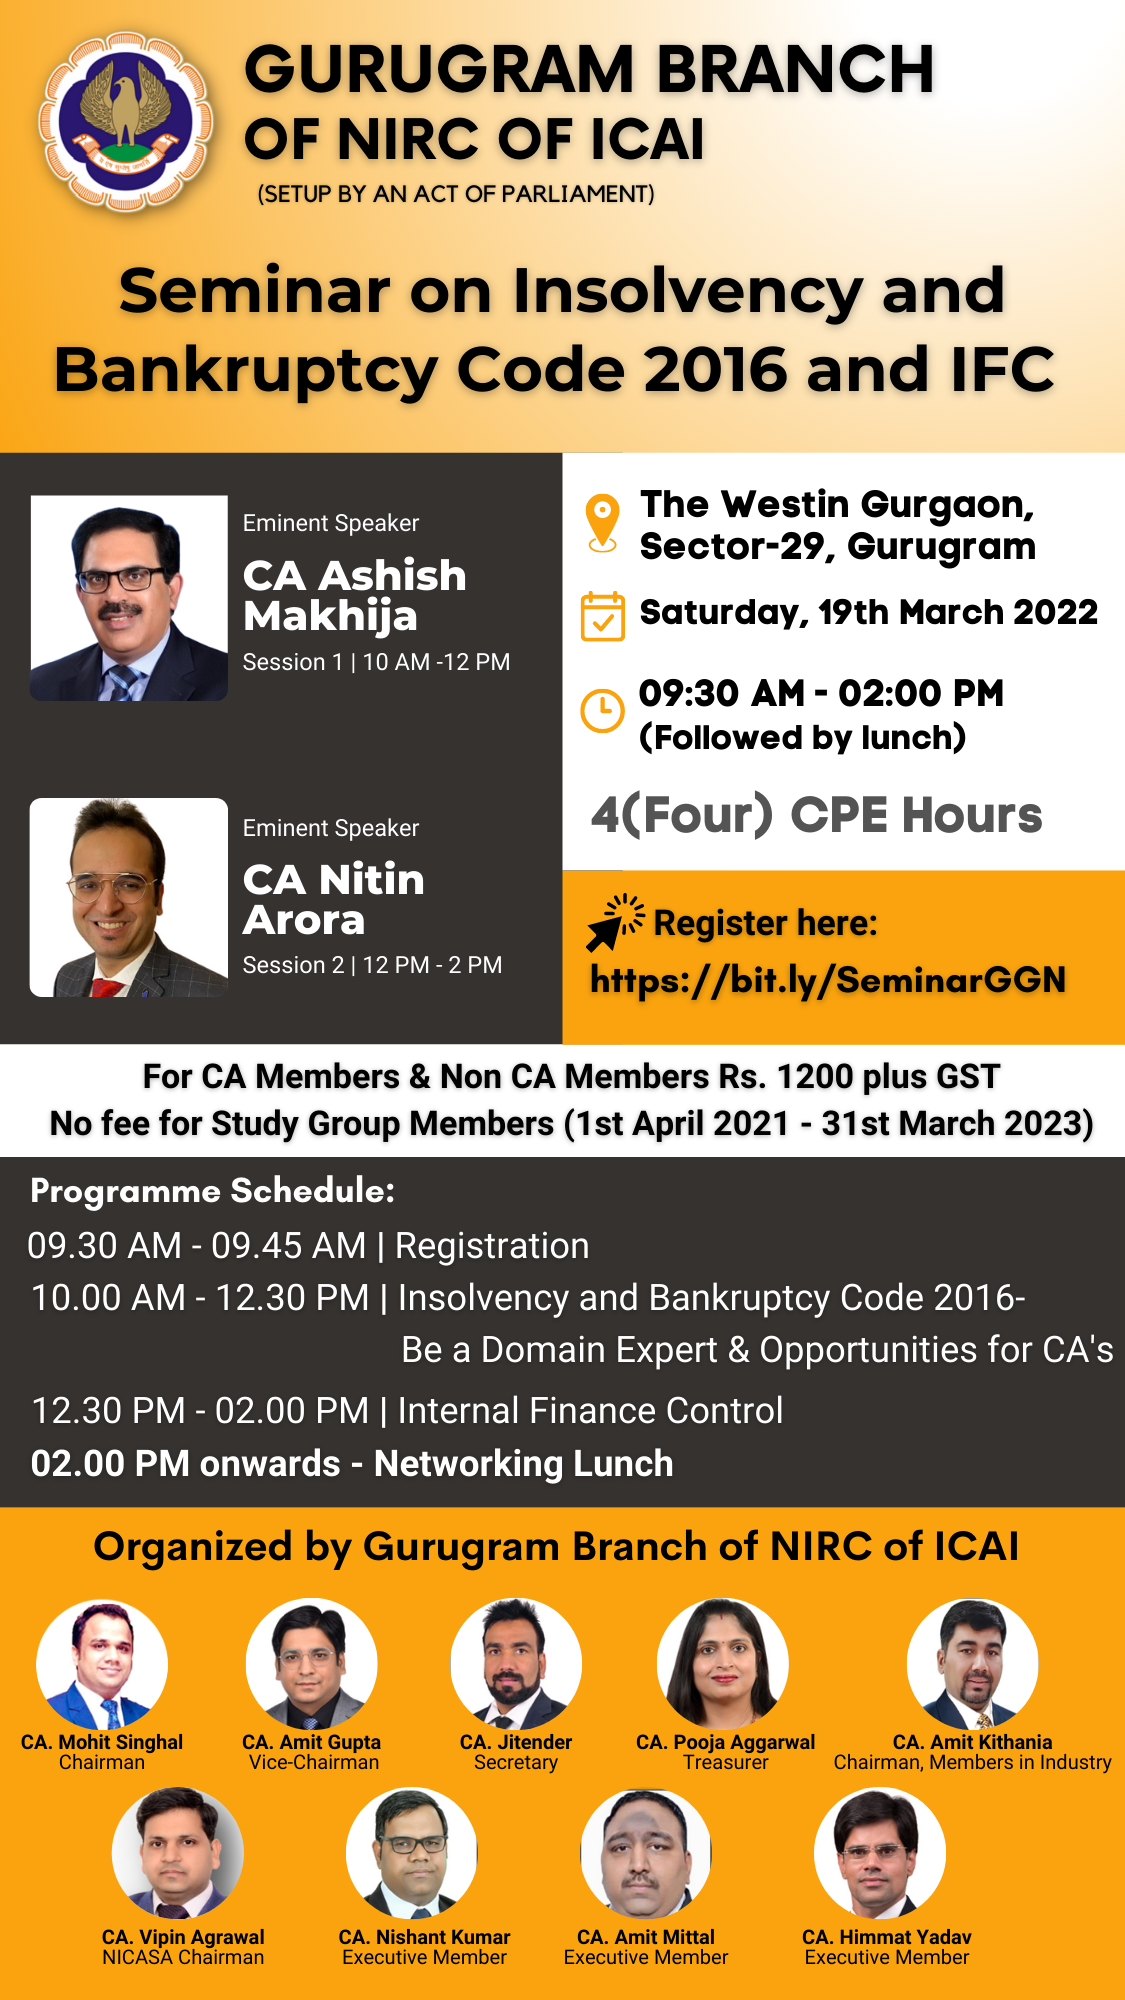 Seminar on Insolvency and Bankruptcy Code 2016 and IFC